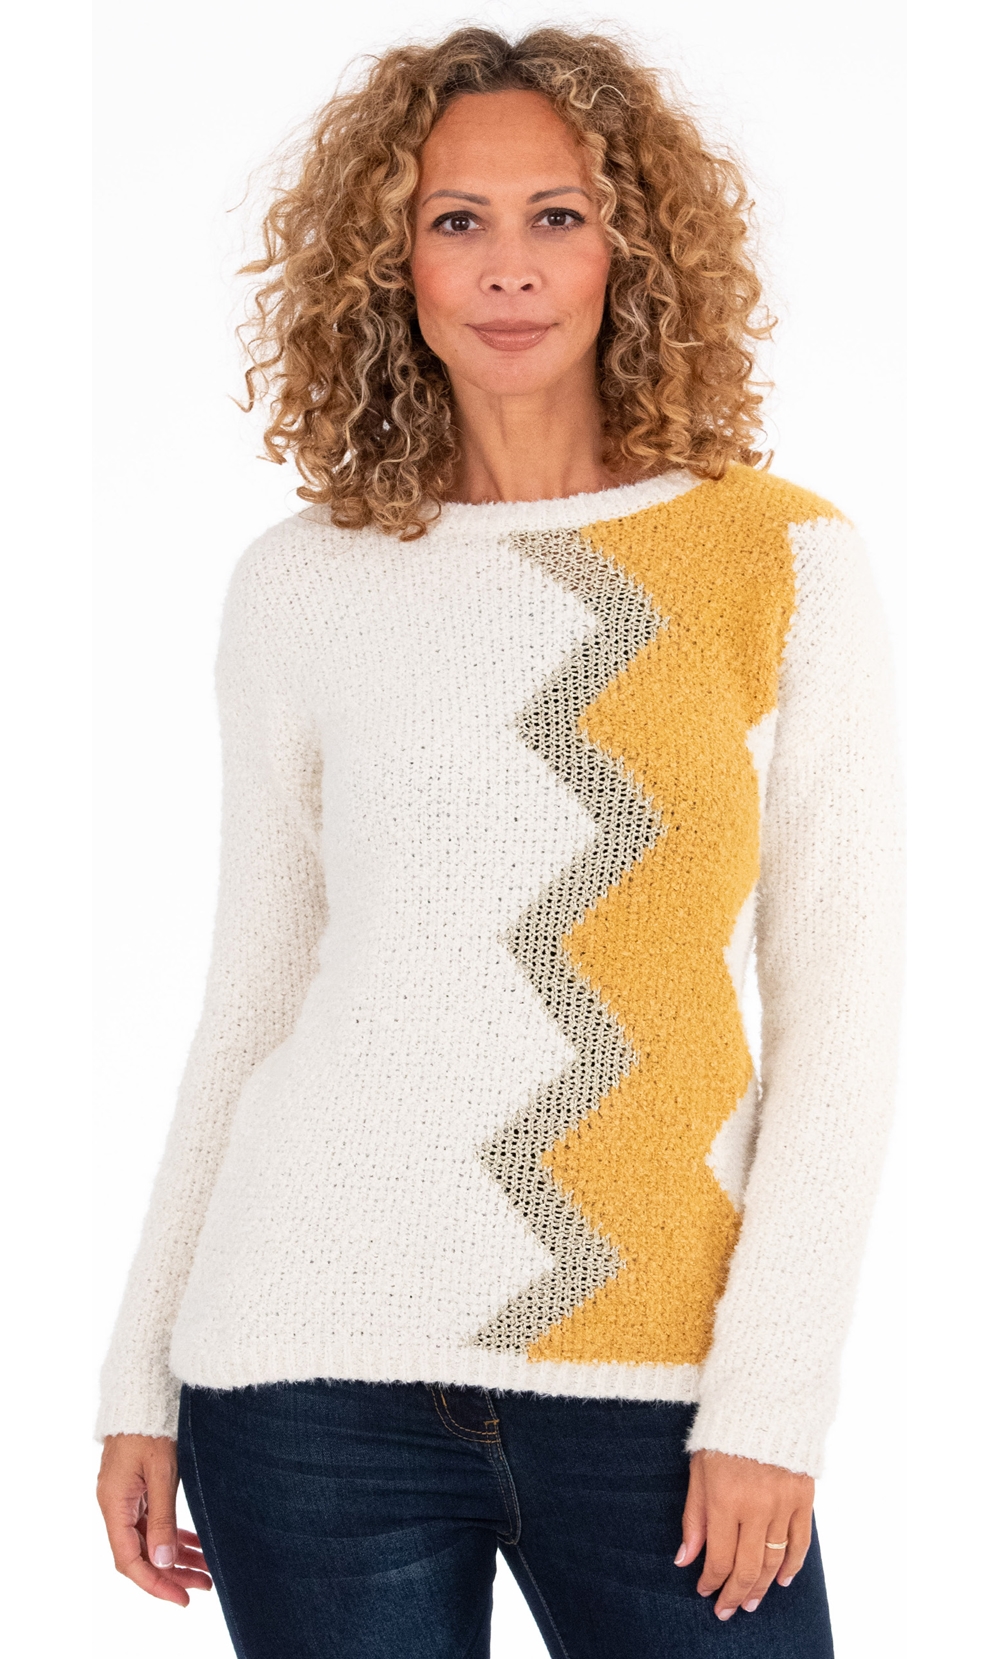 Zig-Zag Patterned Knitted Top